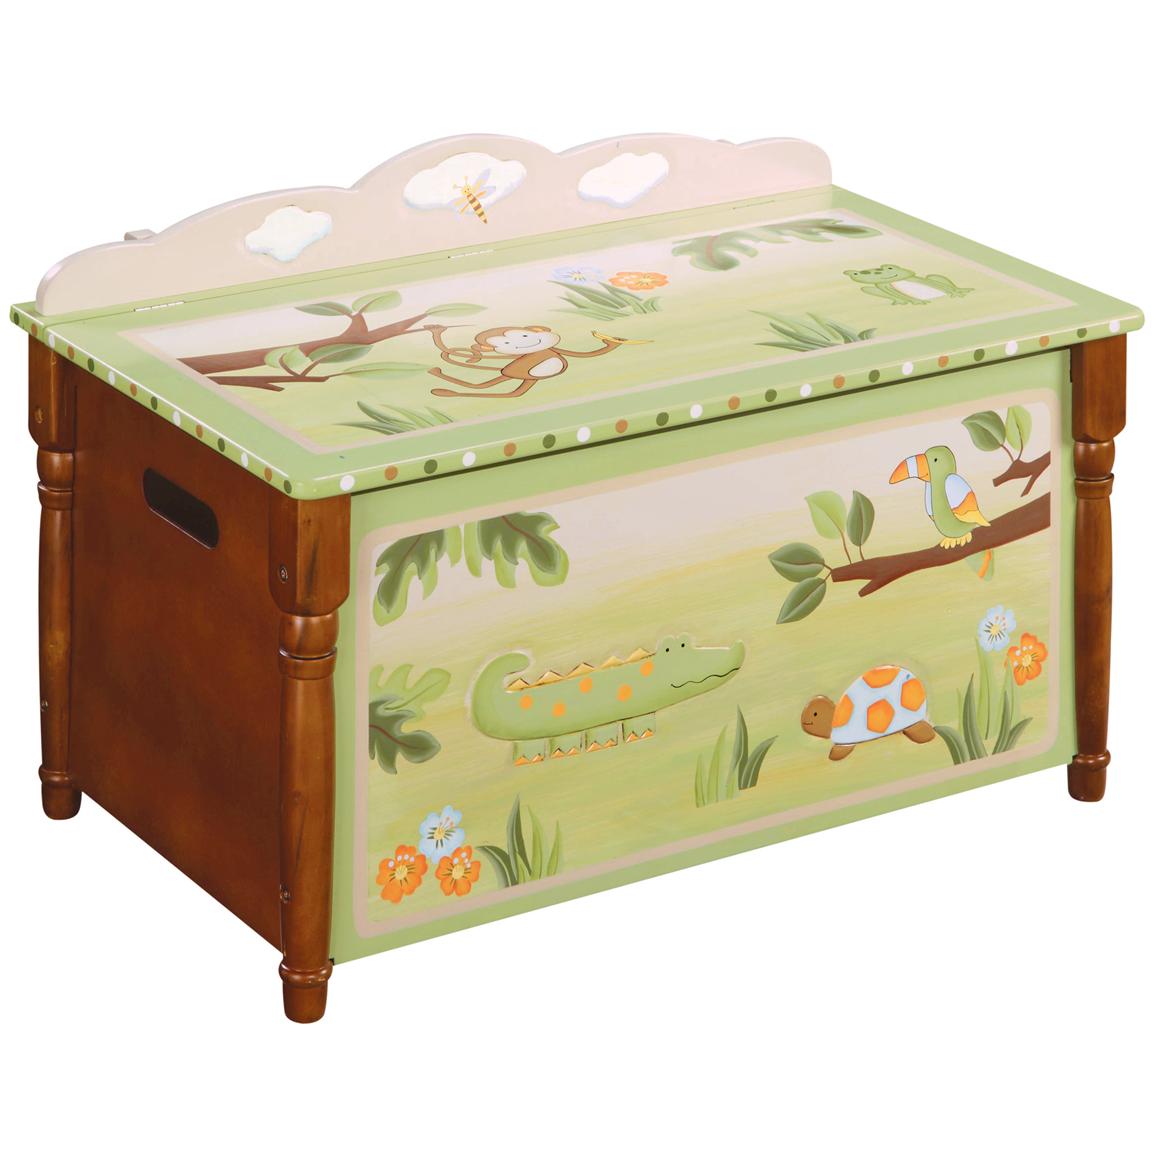 Guidecraft® Papagayo Toy Box - 234975, Kid's Furniture at Sportsman's Guide